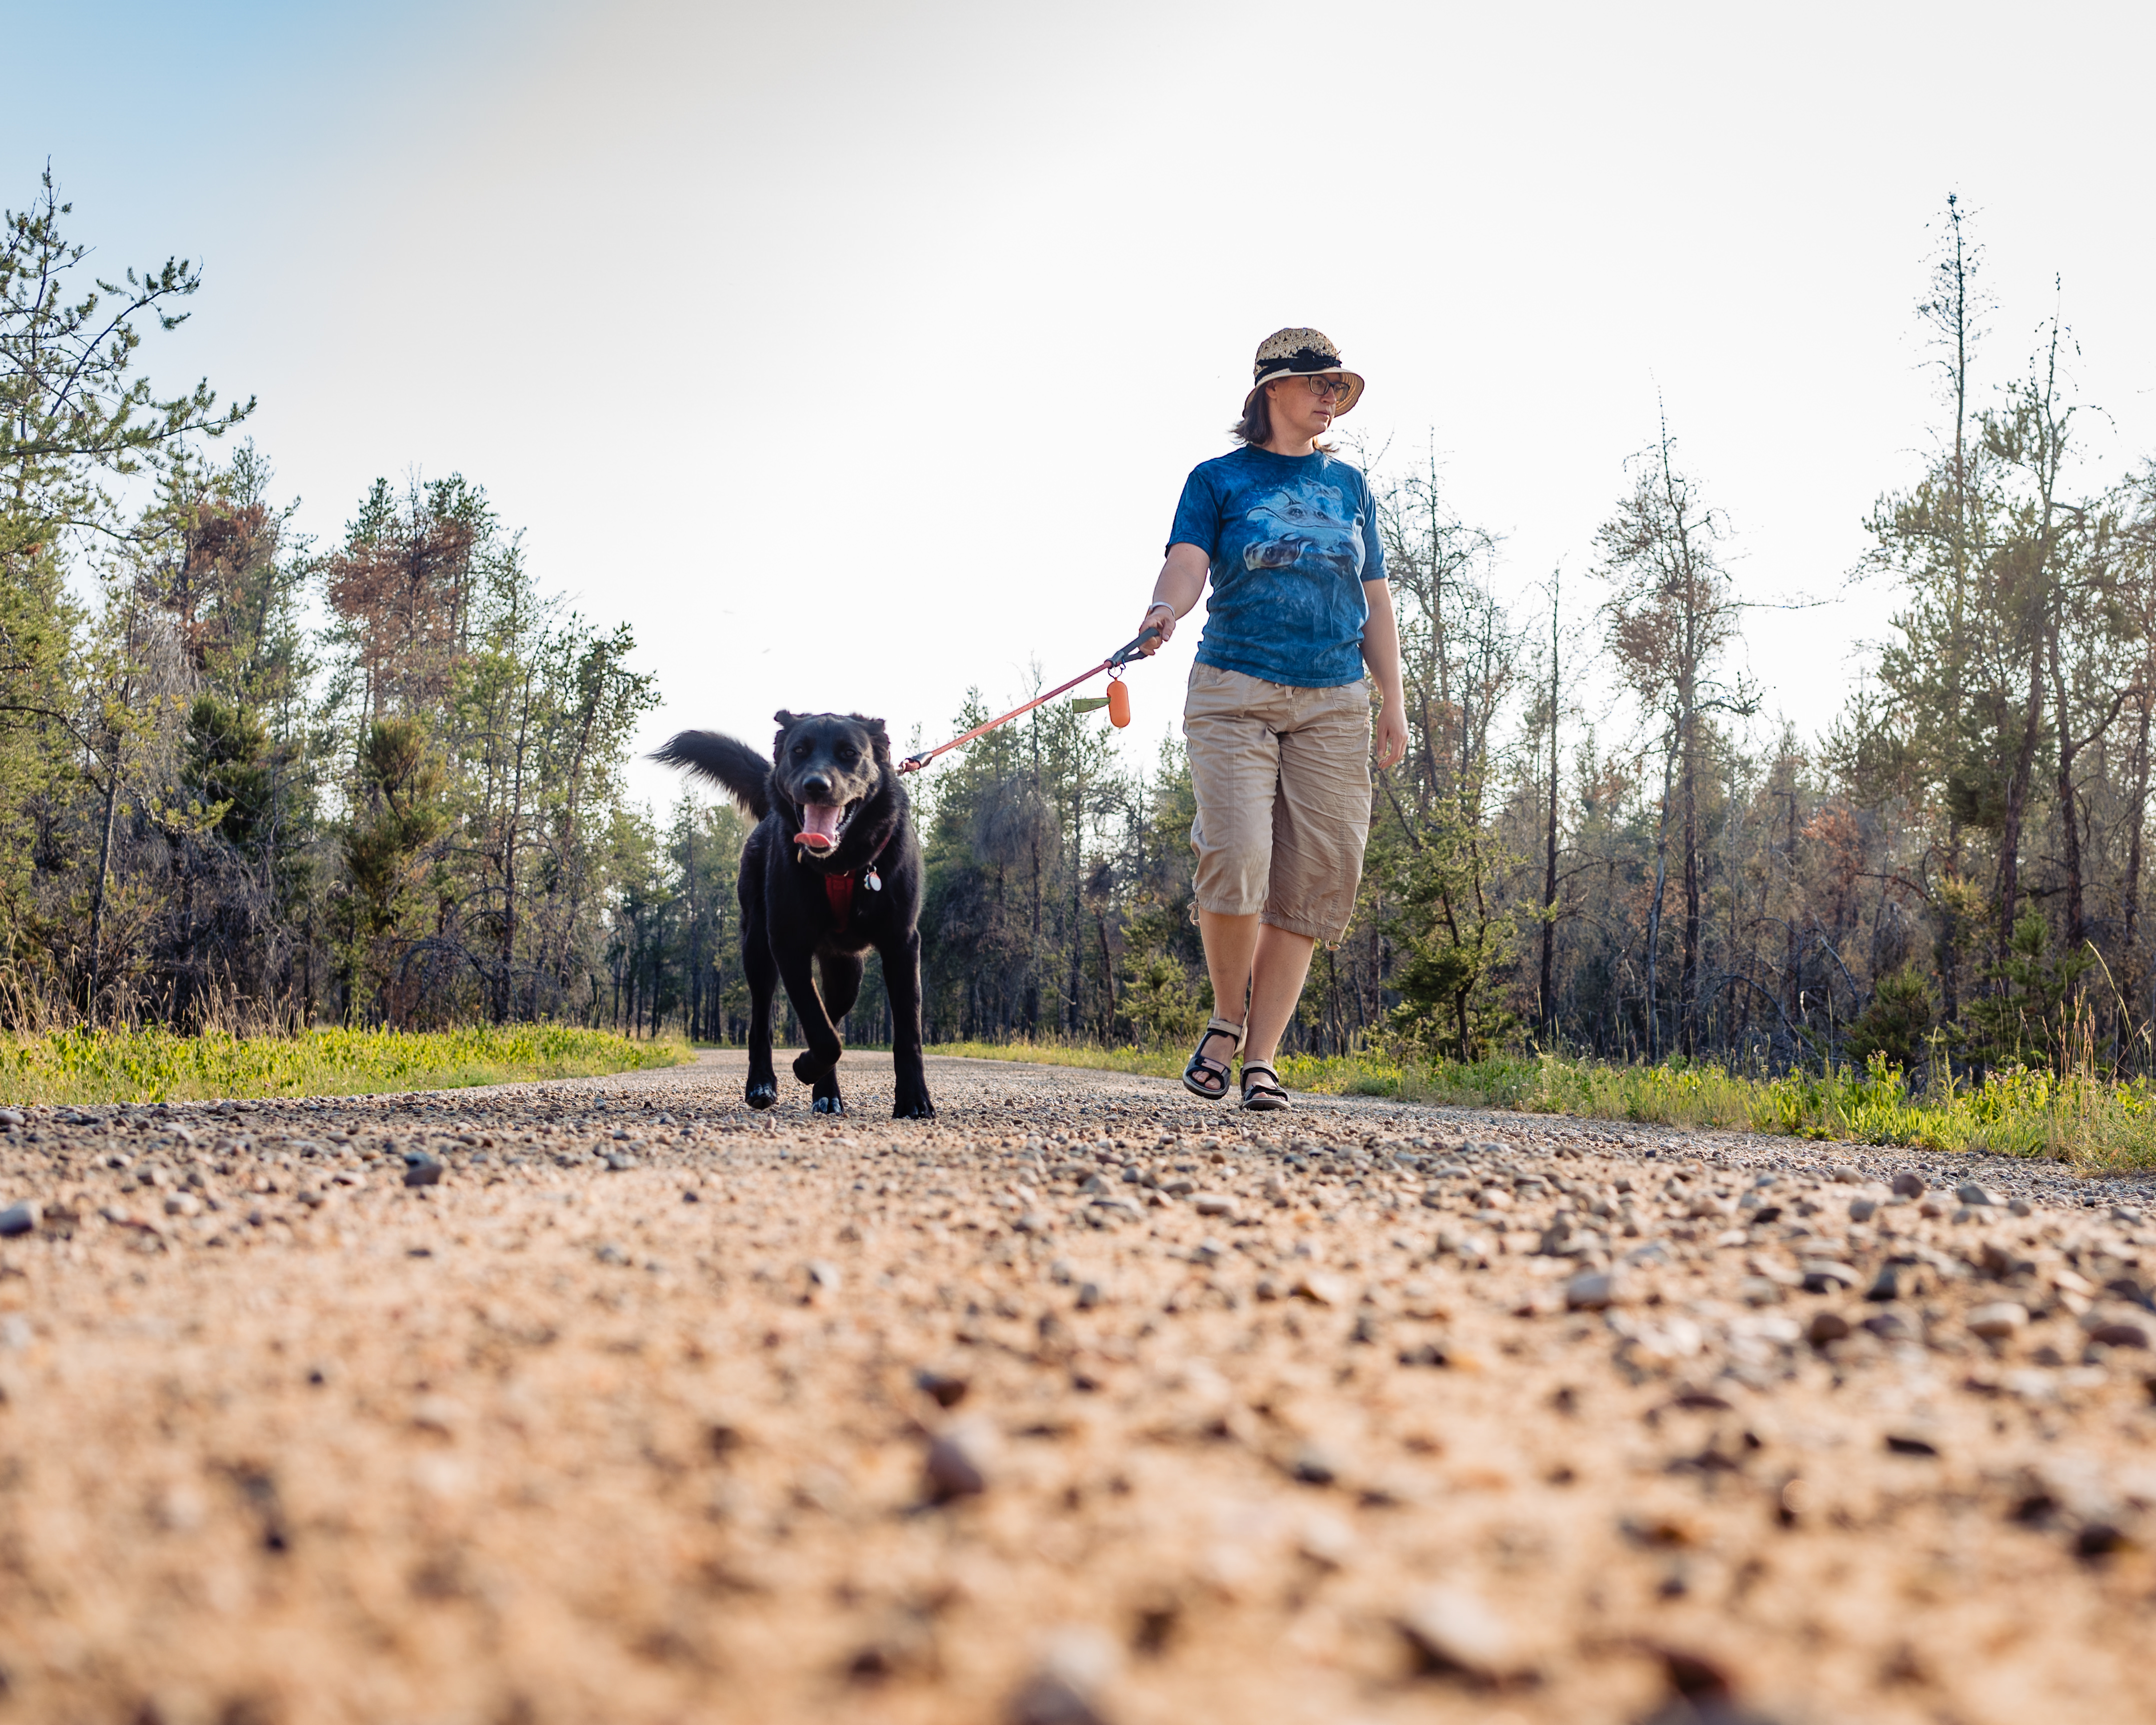 Walk at the Moose Lake Campground · Photo by The 38 Photography